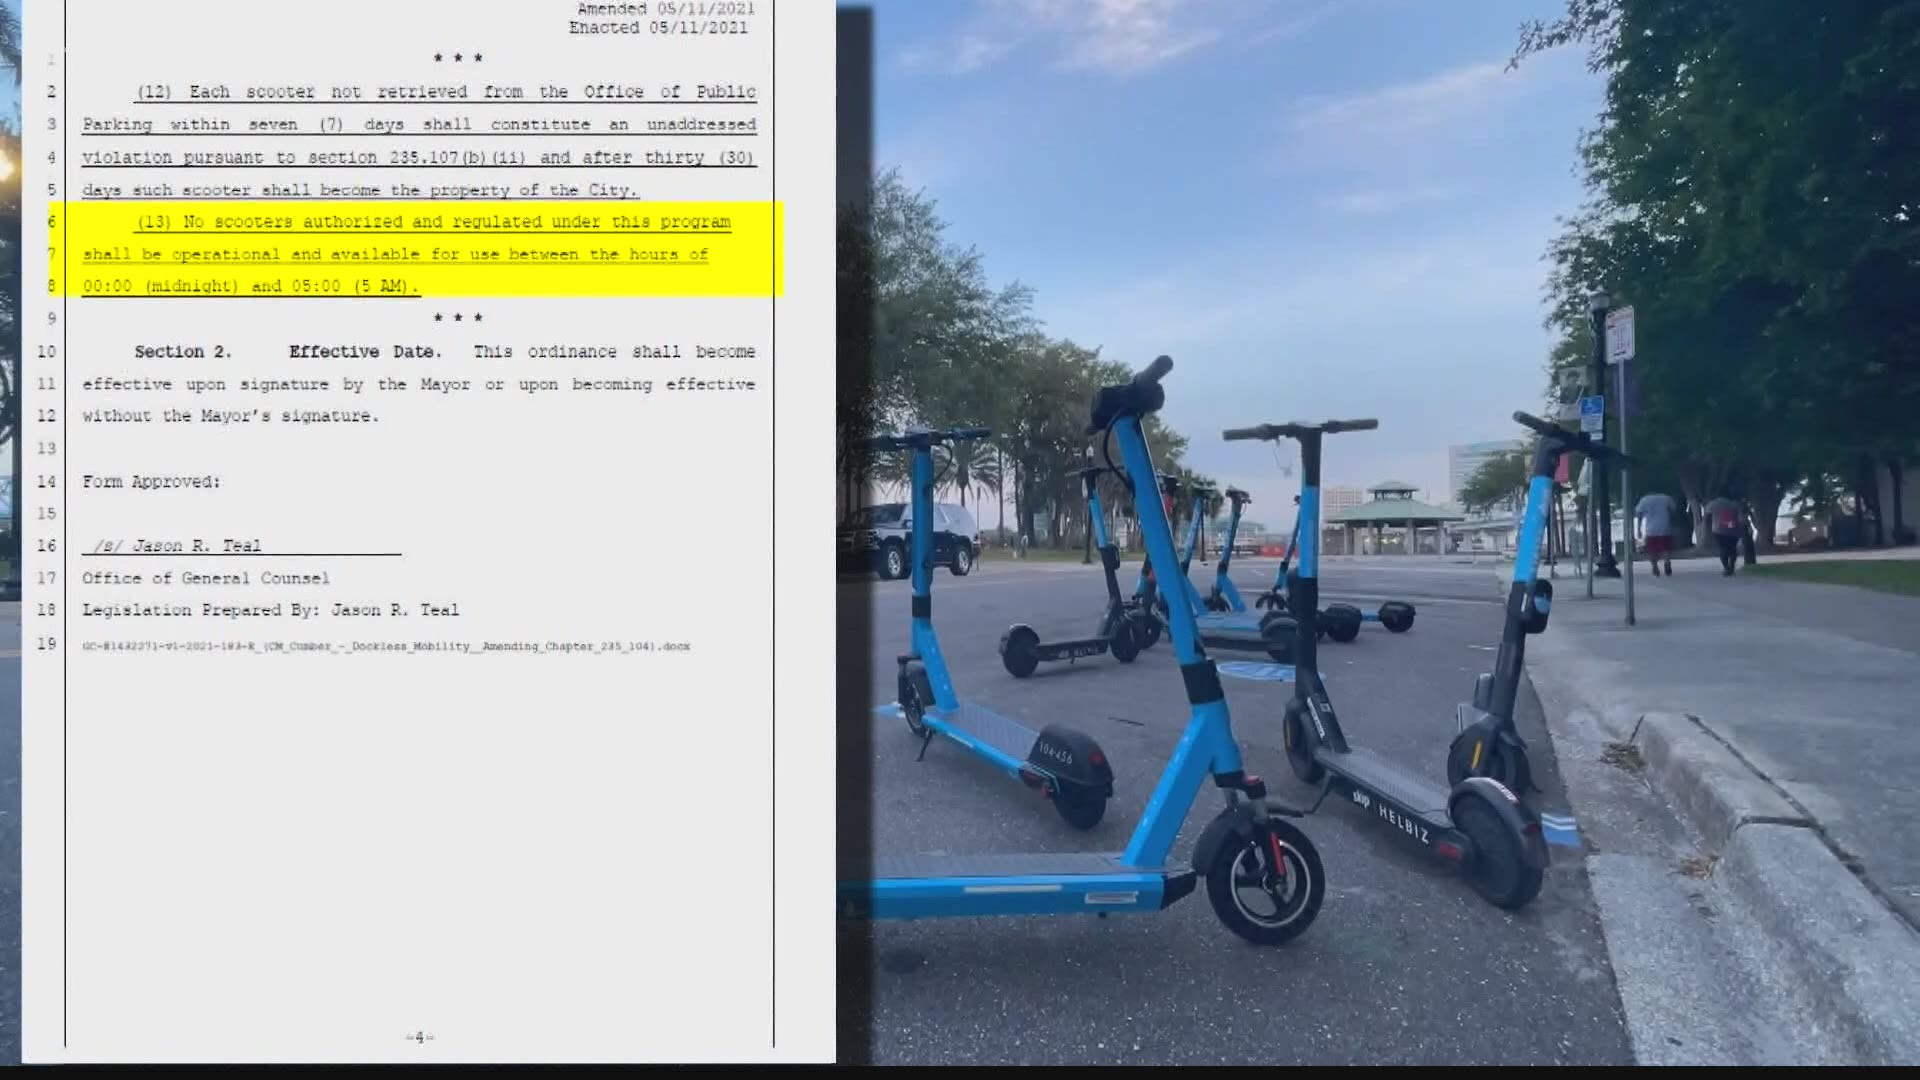 Curfew starts for scooters in Downtown Jacksonville